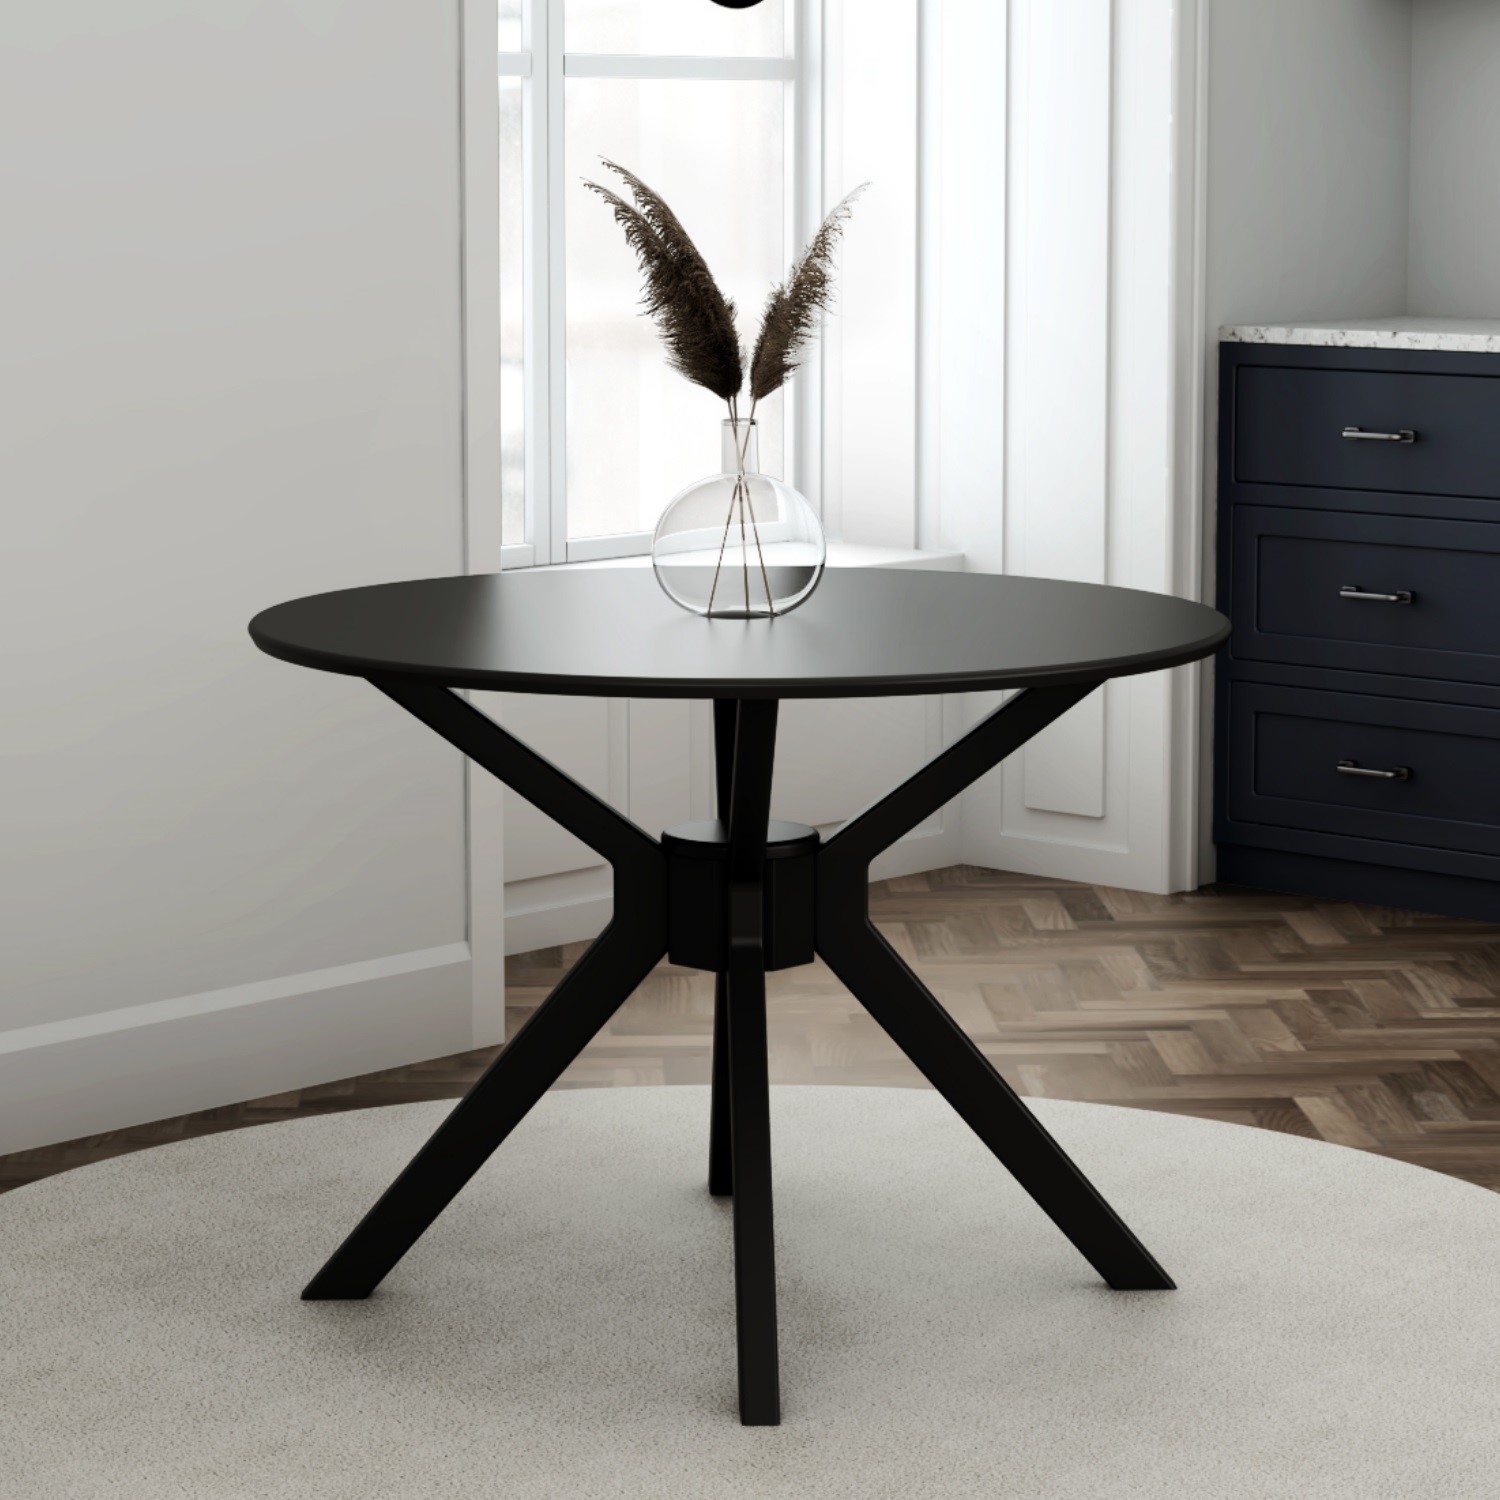 Photo of Small round black dining table - seats 4 - karie